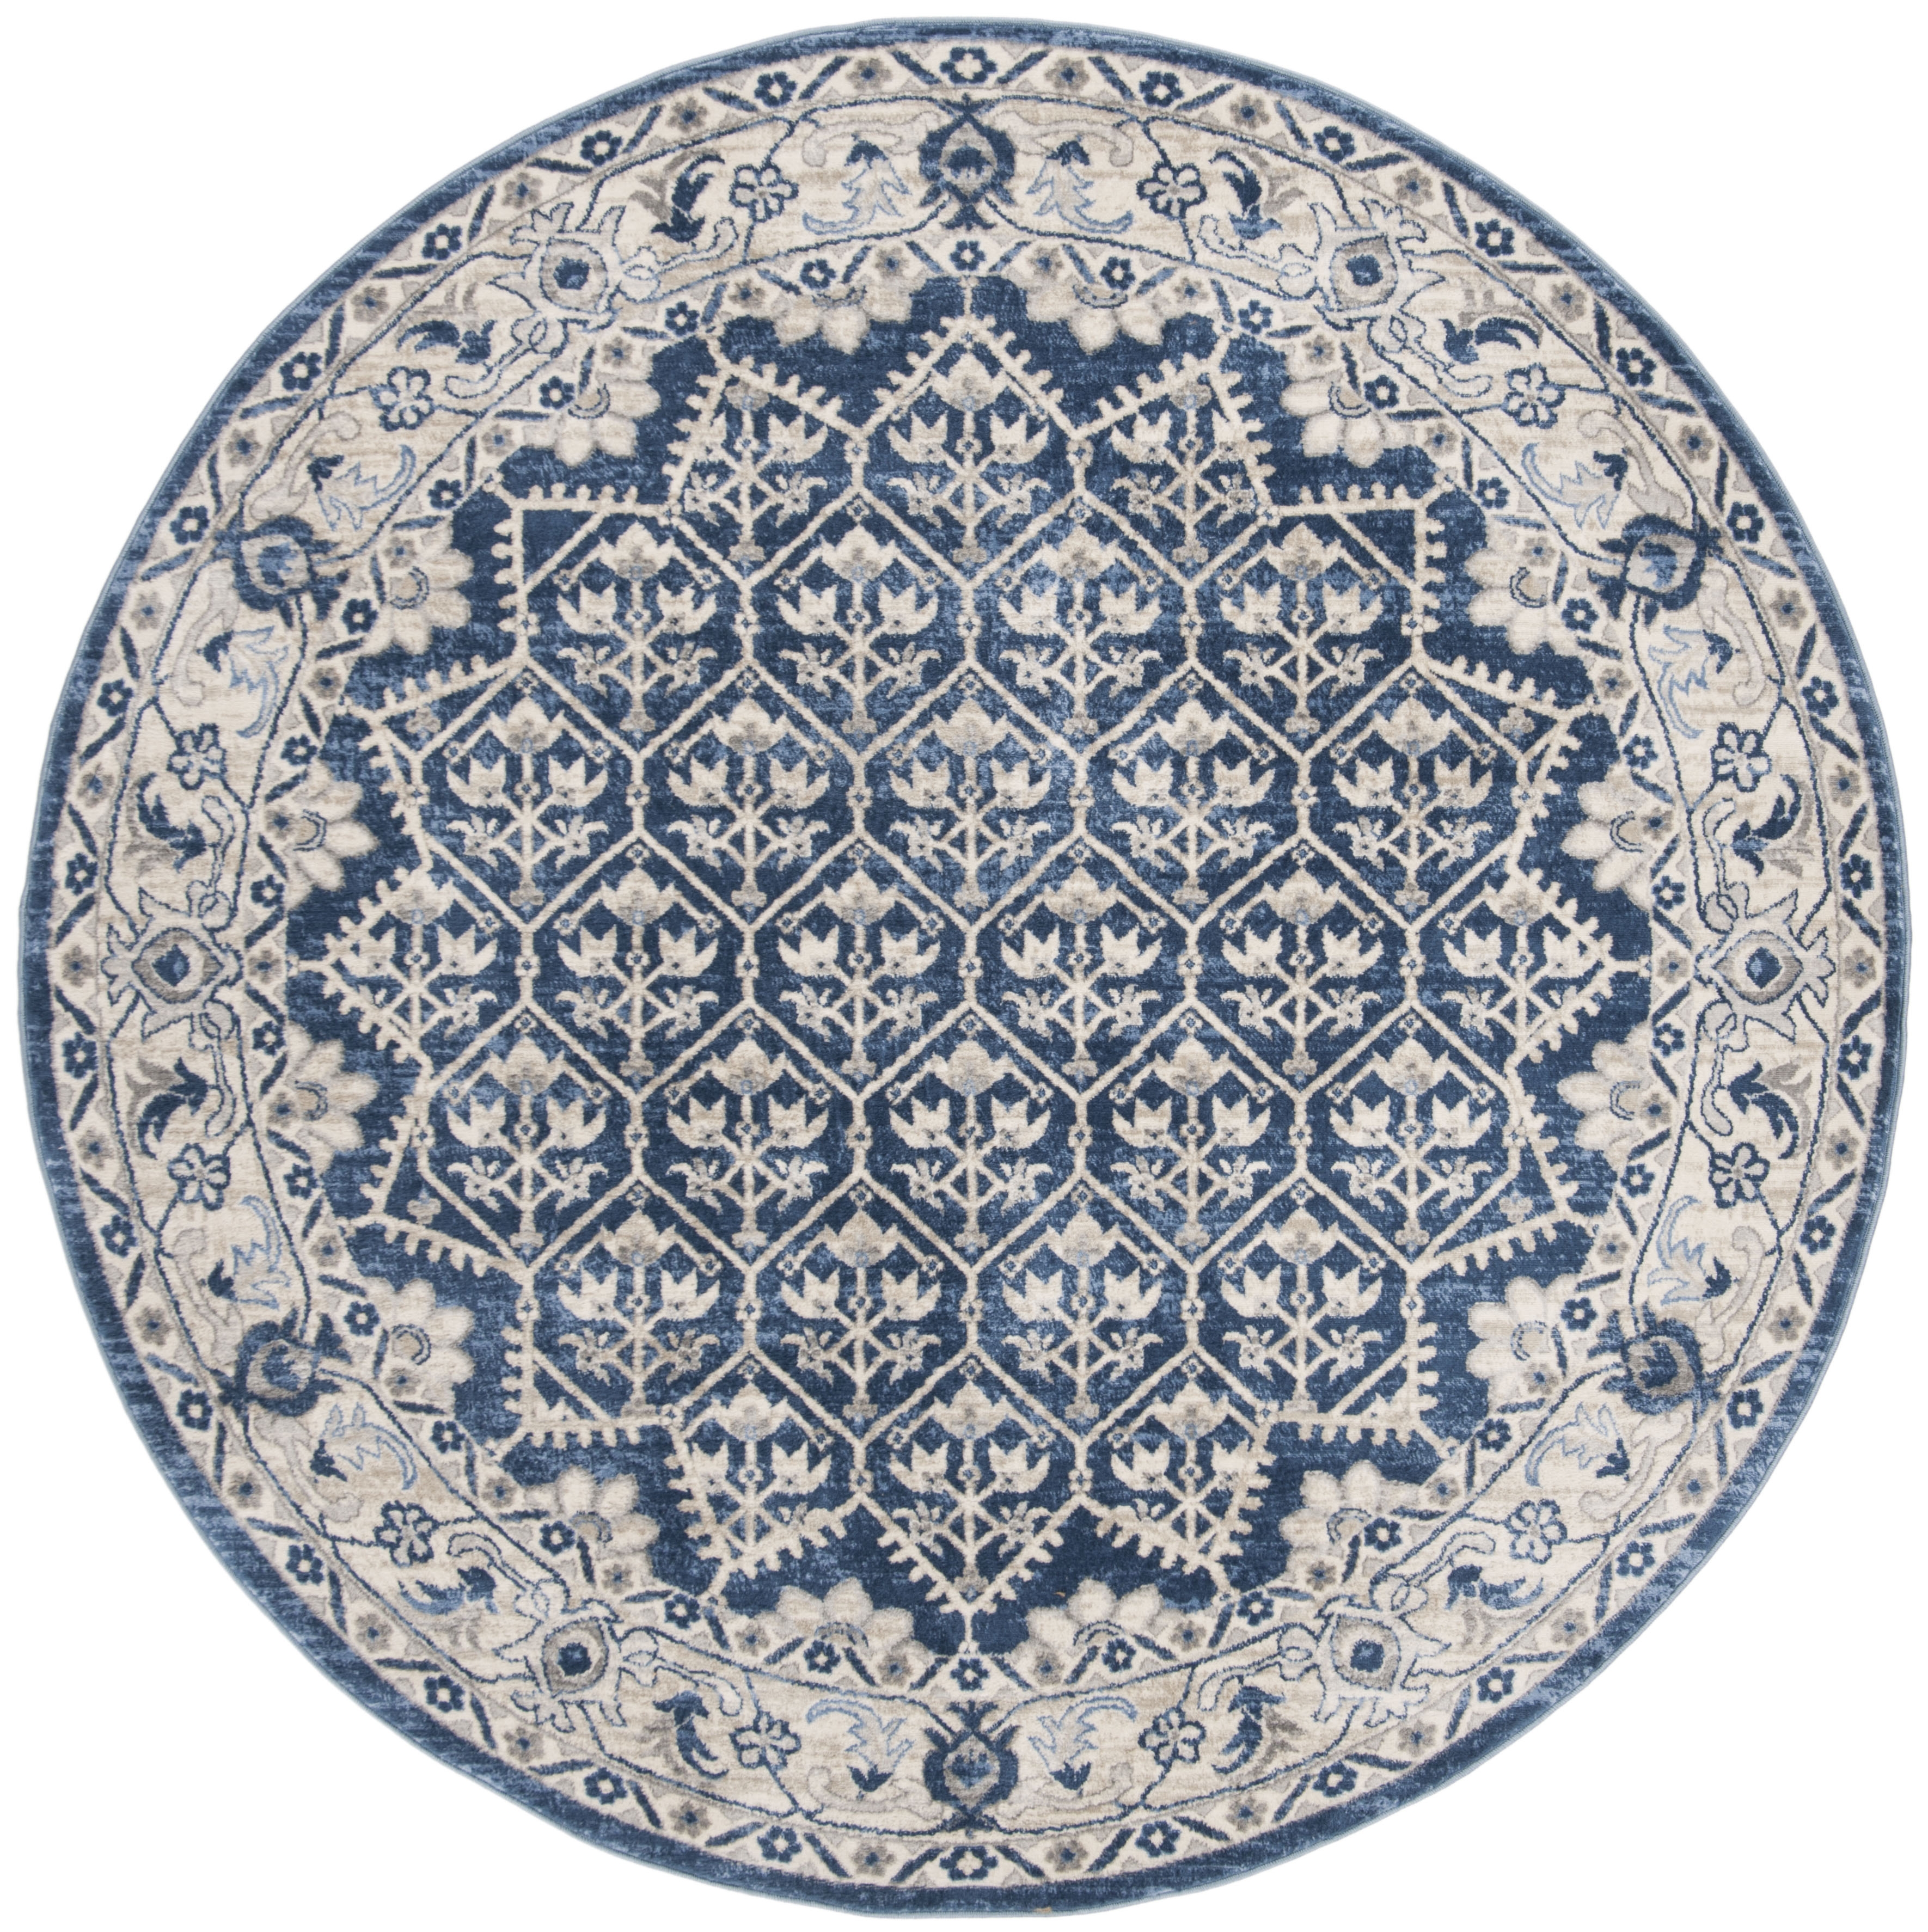 Arlo Home Woven Area Rug, BNT869M, Navy/Light Grey,  6' 7" X 6' 7" Round - Image 0